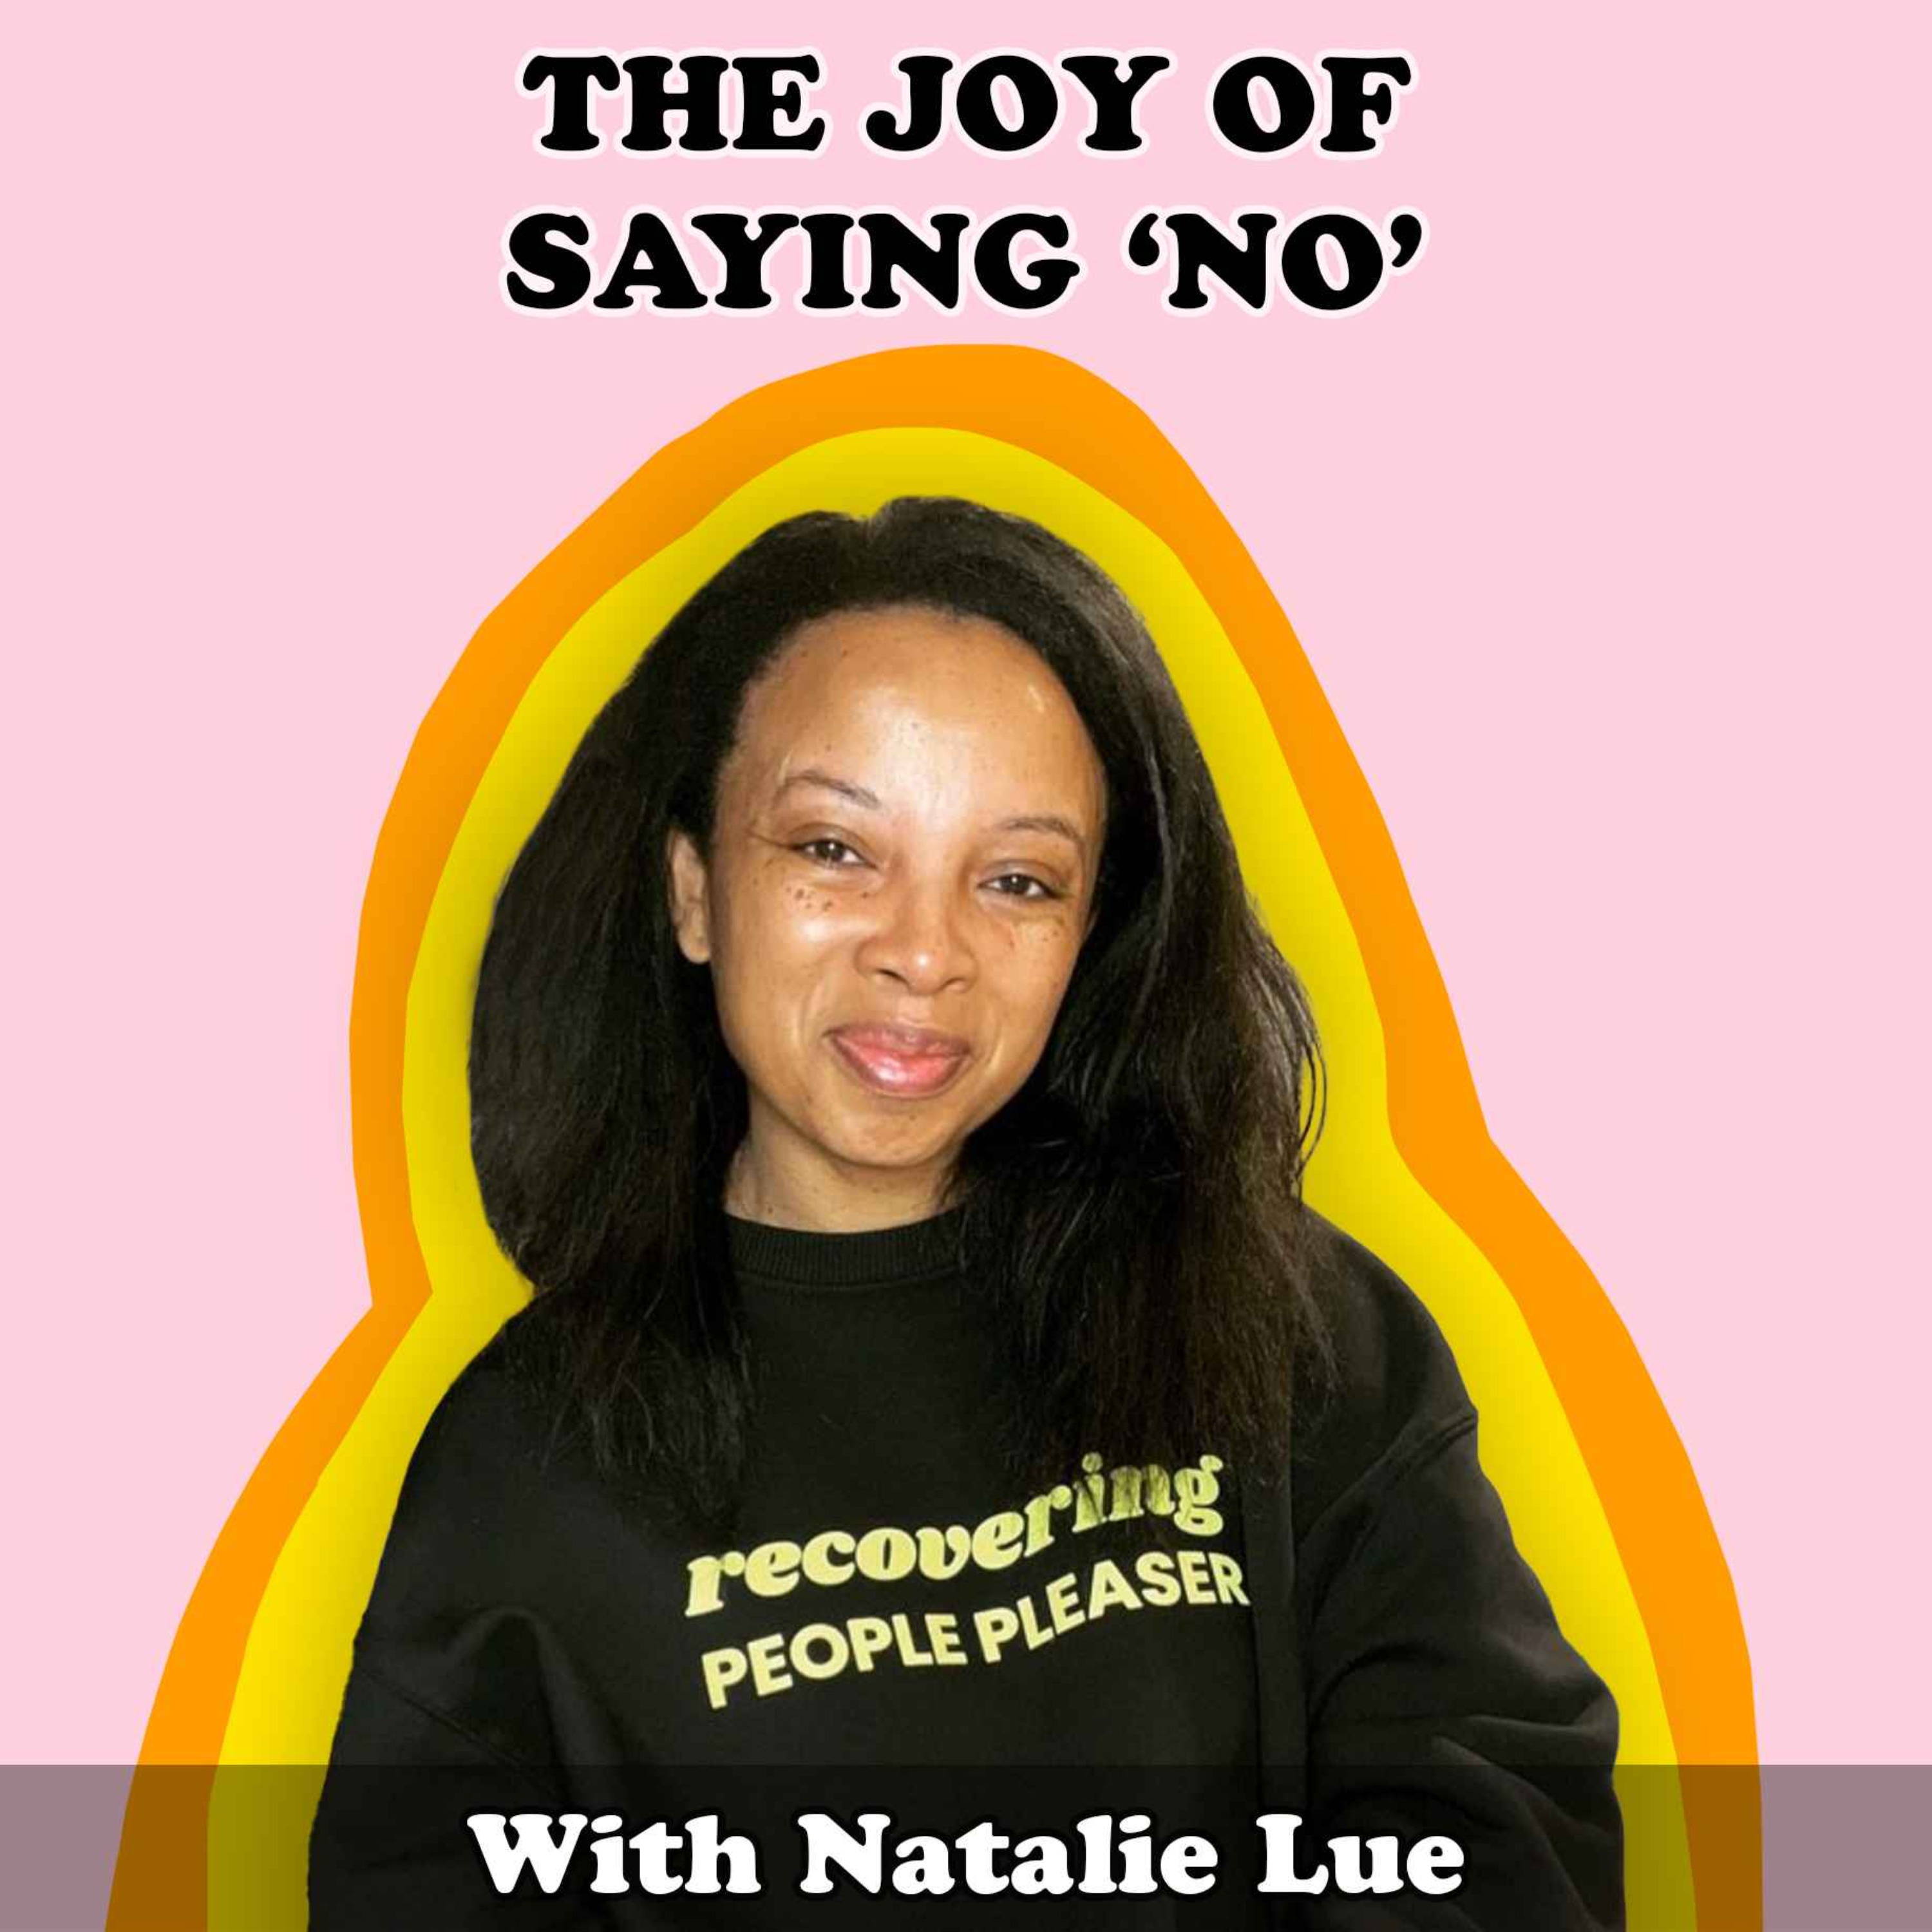 #10 The Joy Of Saying 'No' with Natalie Lue